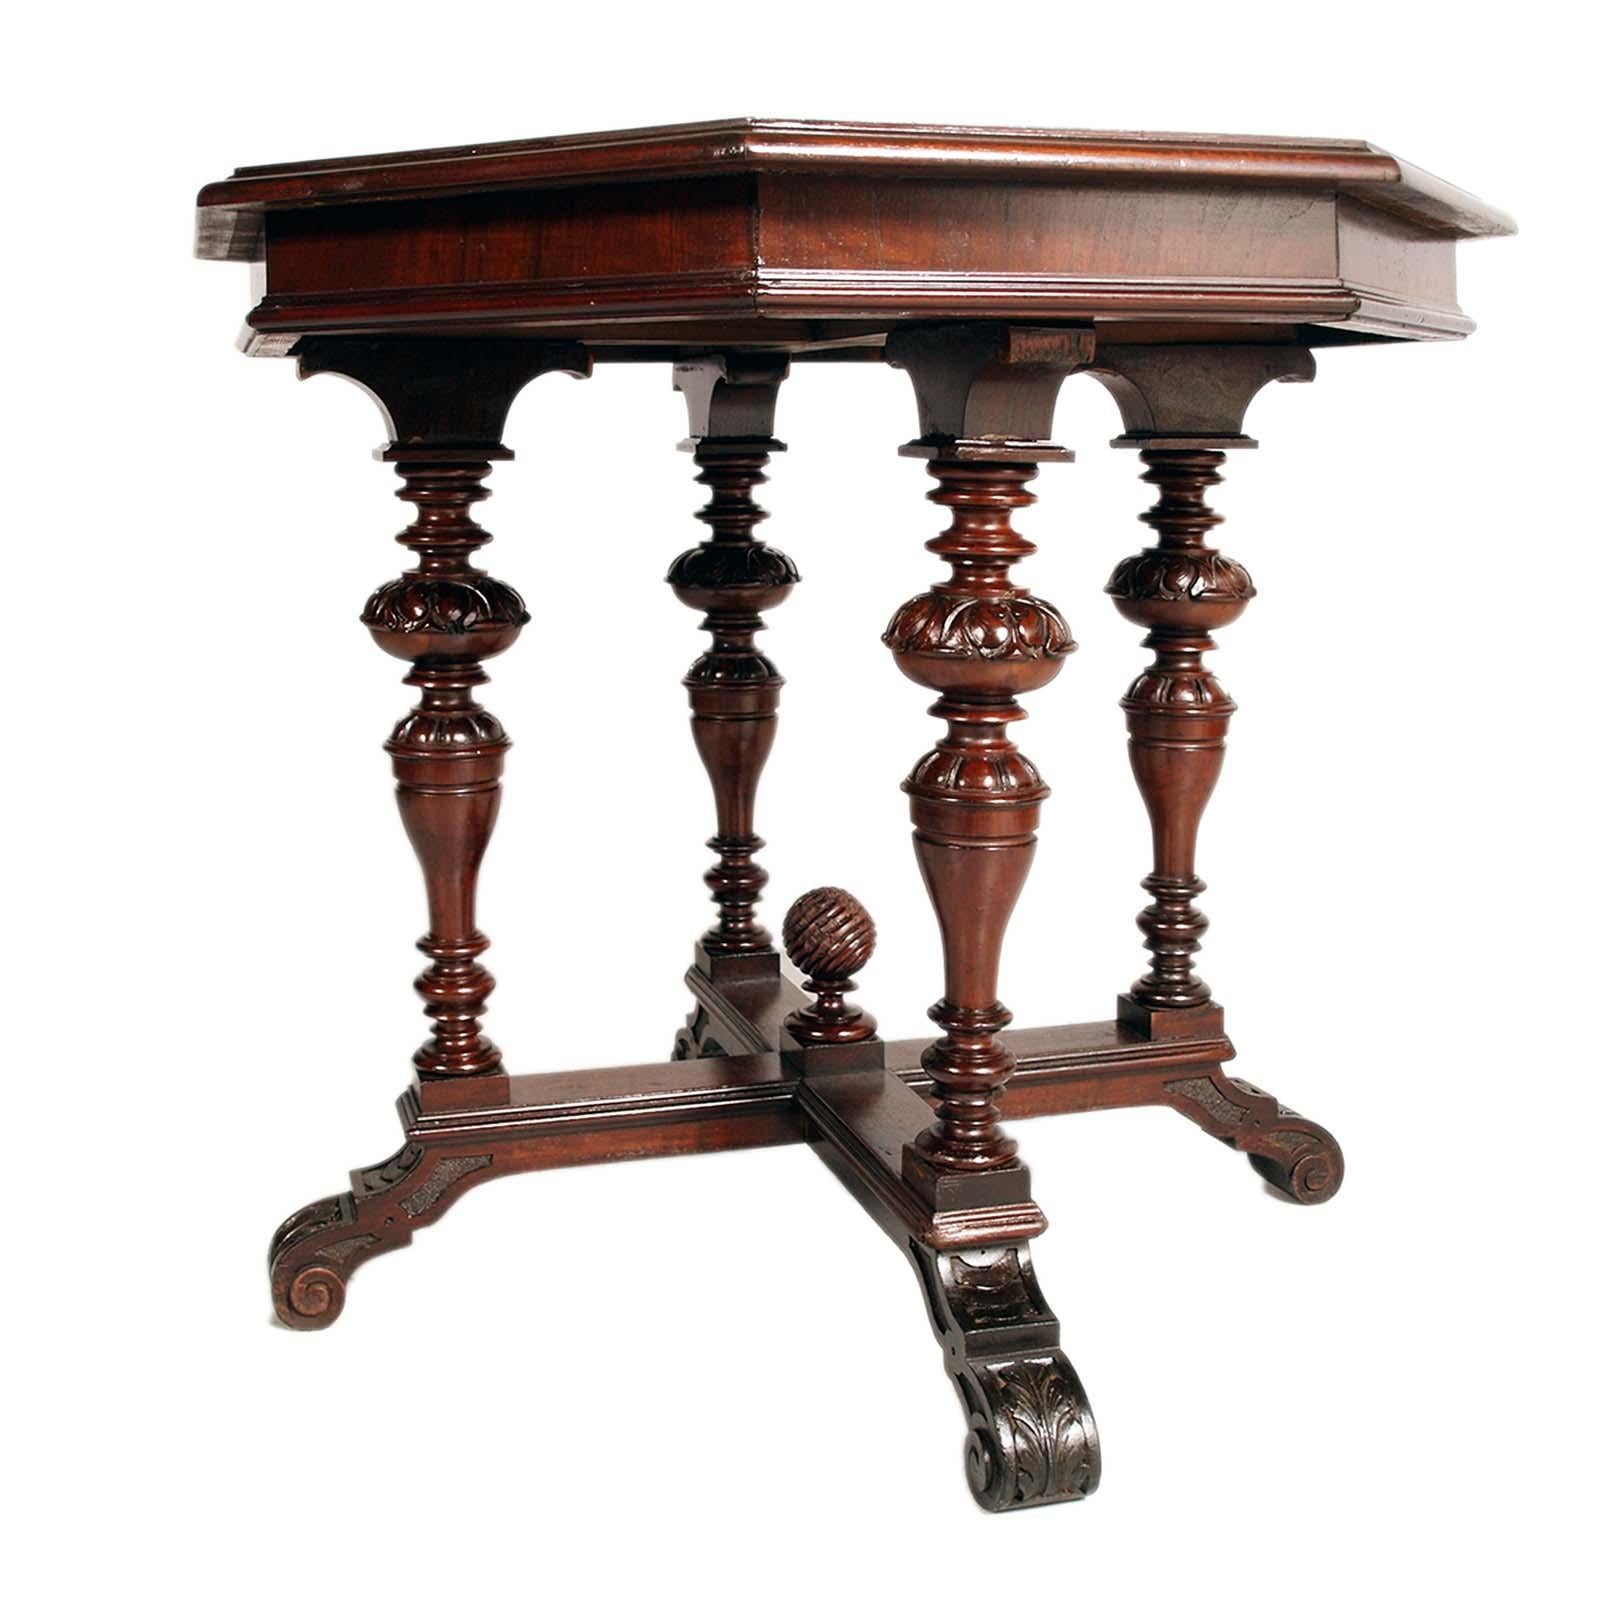 Venetian Neo-Renaissance Octagonal Walnut Table by Testolini Freres, Venice, 18th century. Table with structure in turned and hand-carved solid walnut , with the top veneered with walnut root and blond walnut with star-shaped inlay. The table